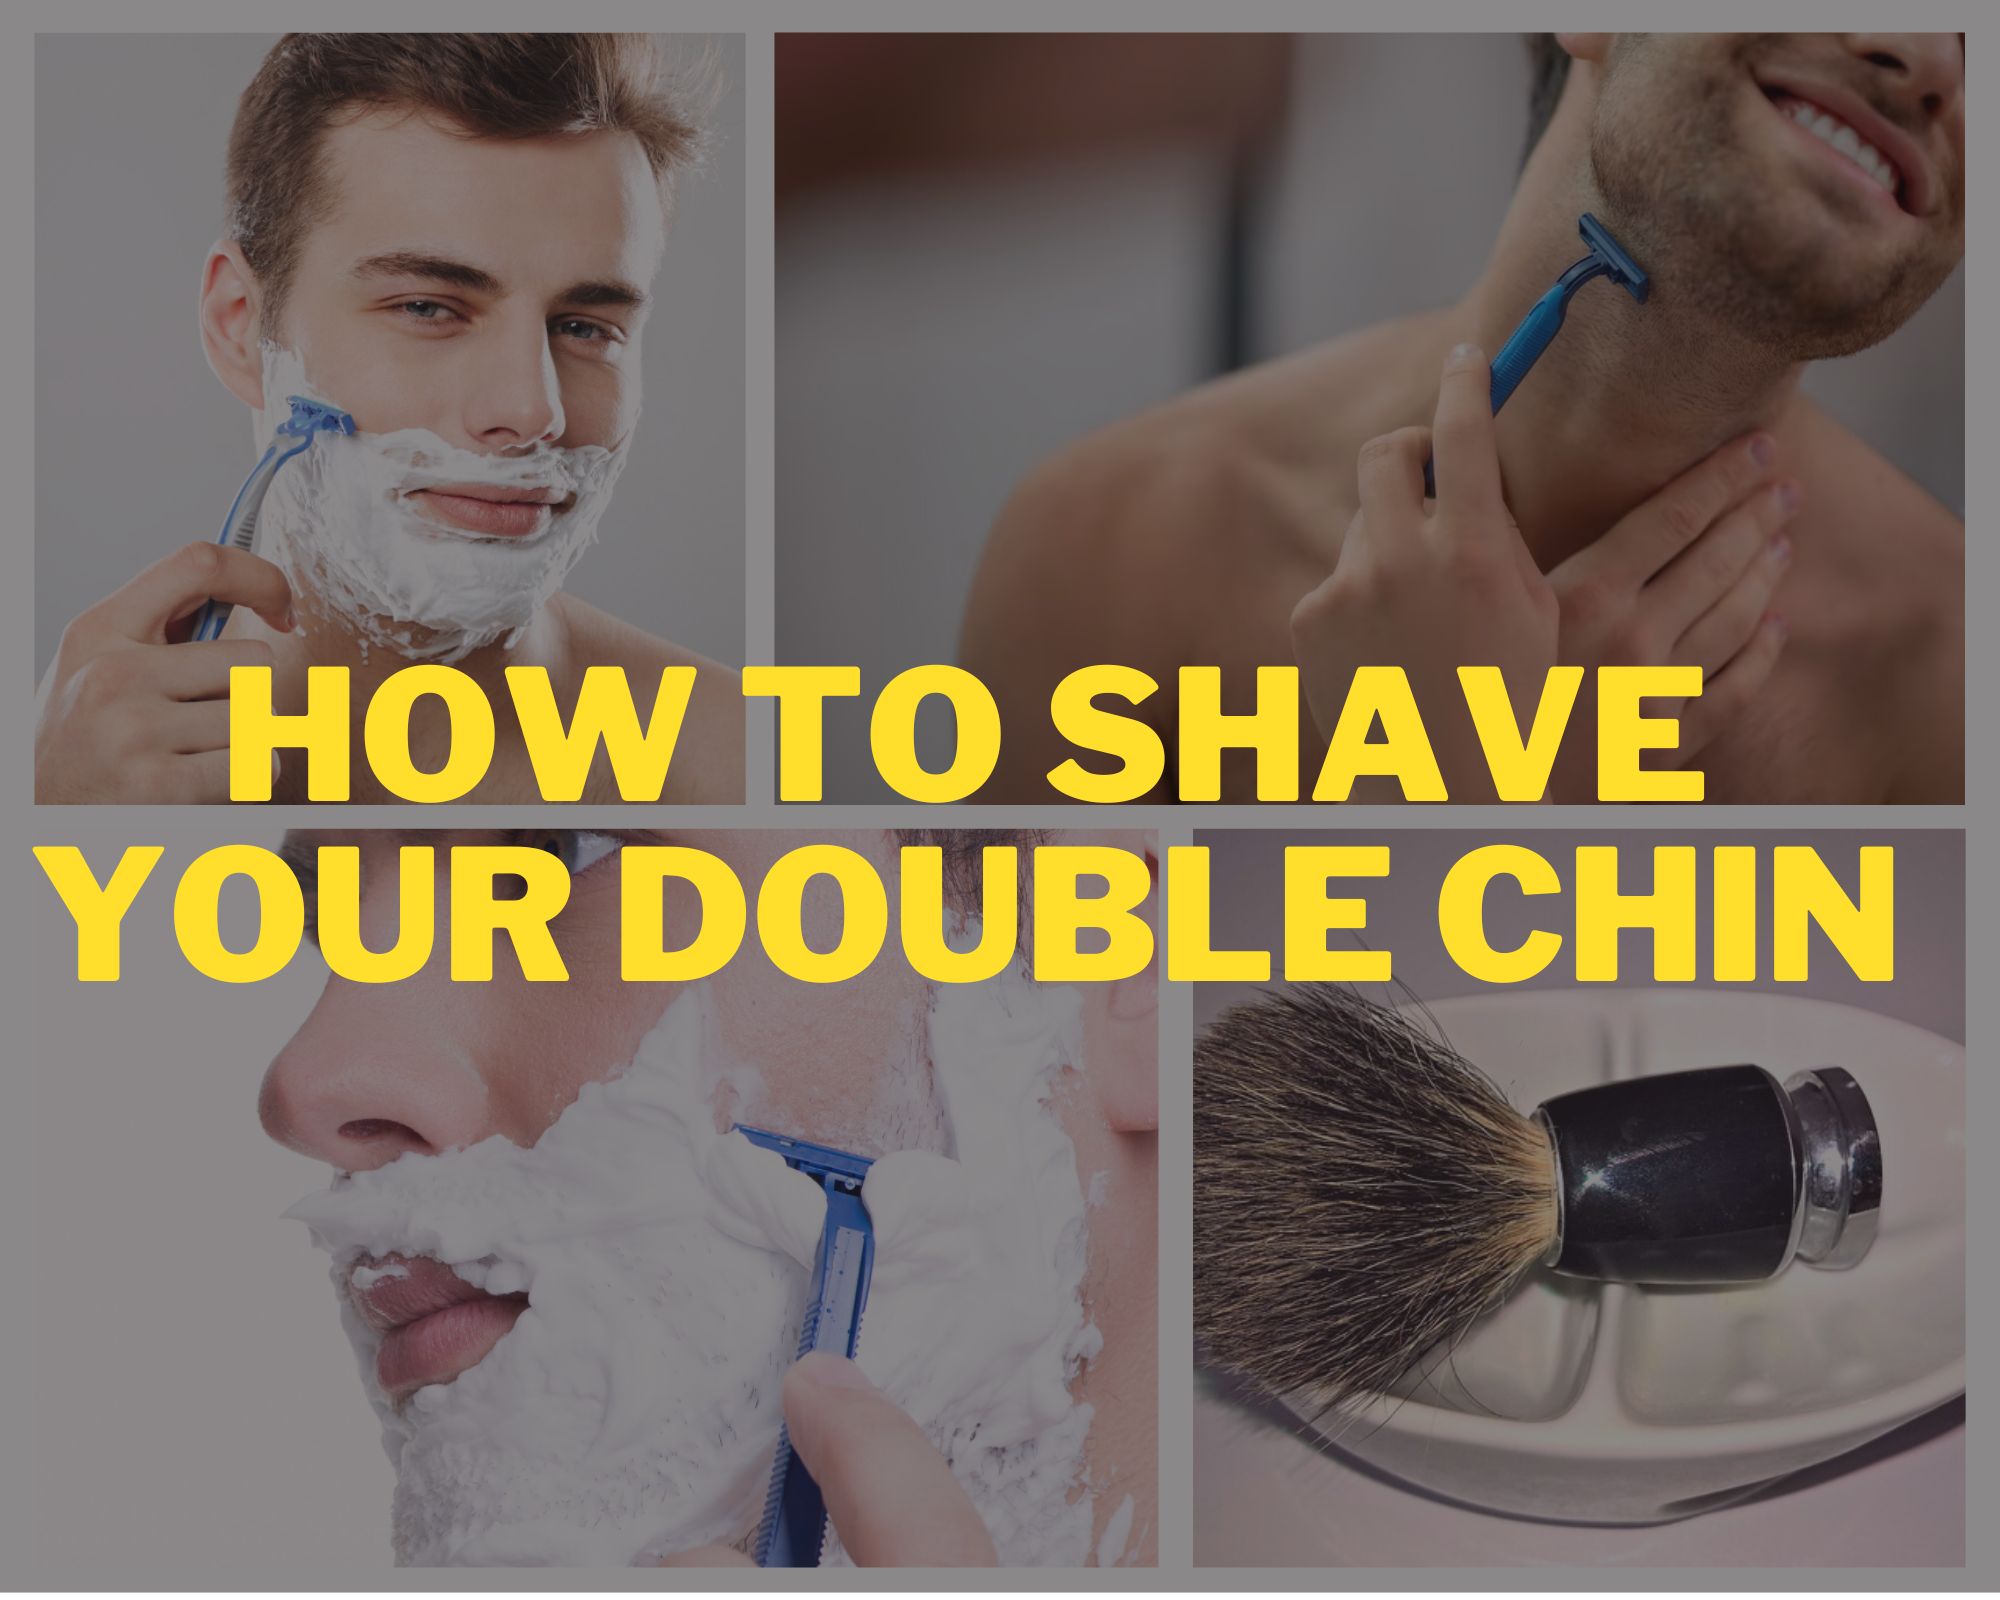 How to shave your double chin